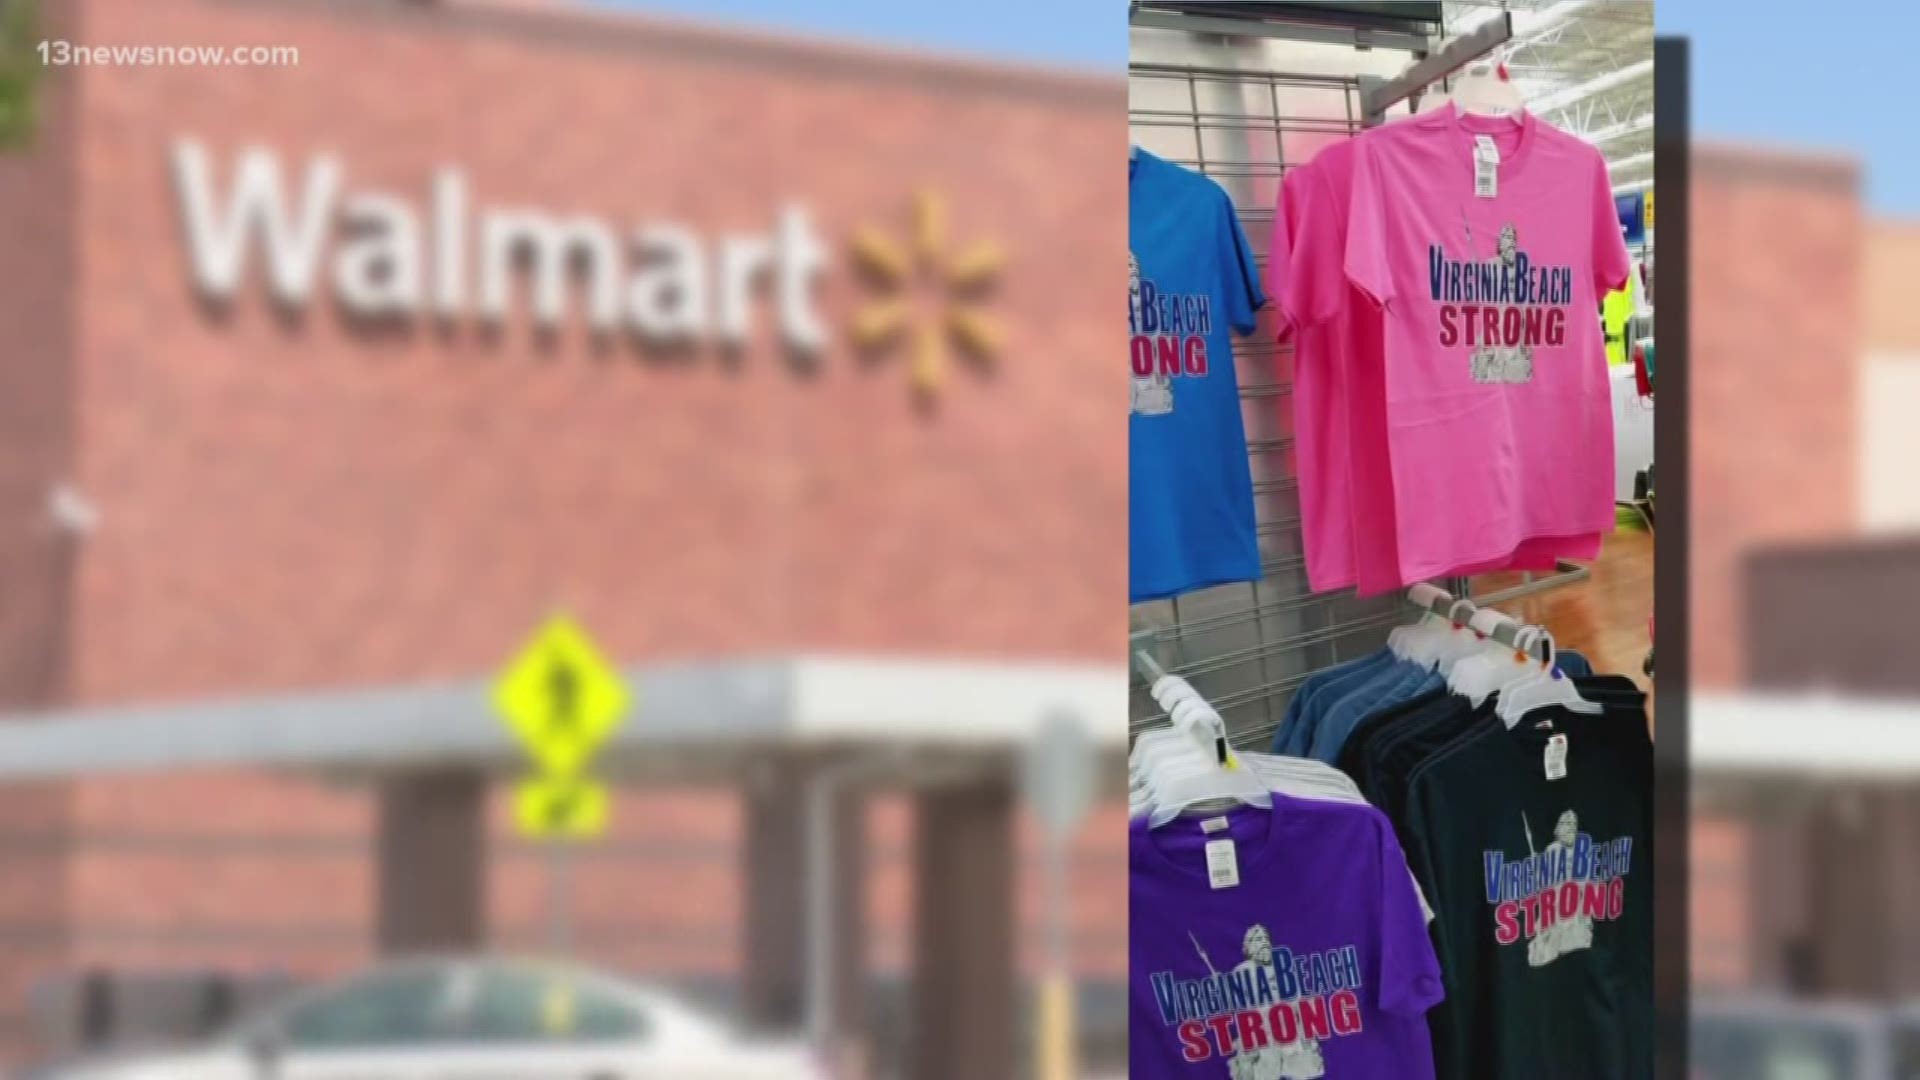 According to Walmart, the shirts, made by Super Gems, were taken down until they have signs letting customers know money from the shirts is being donated.